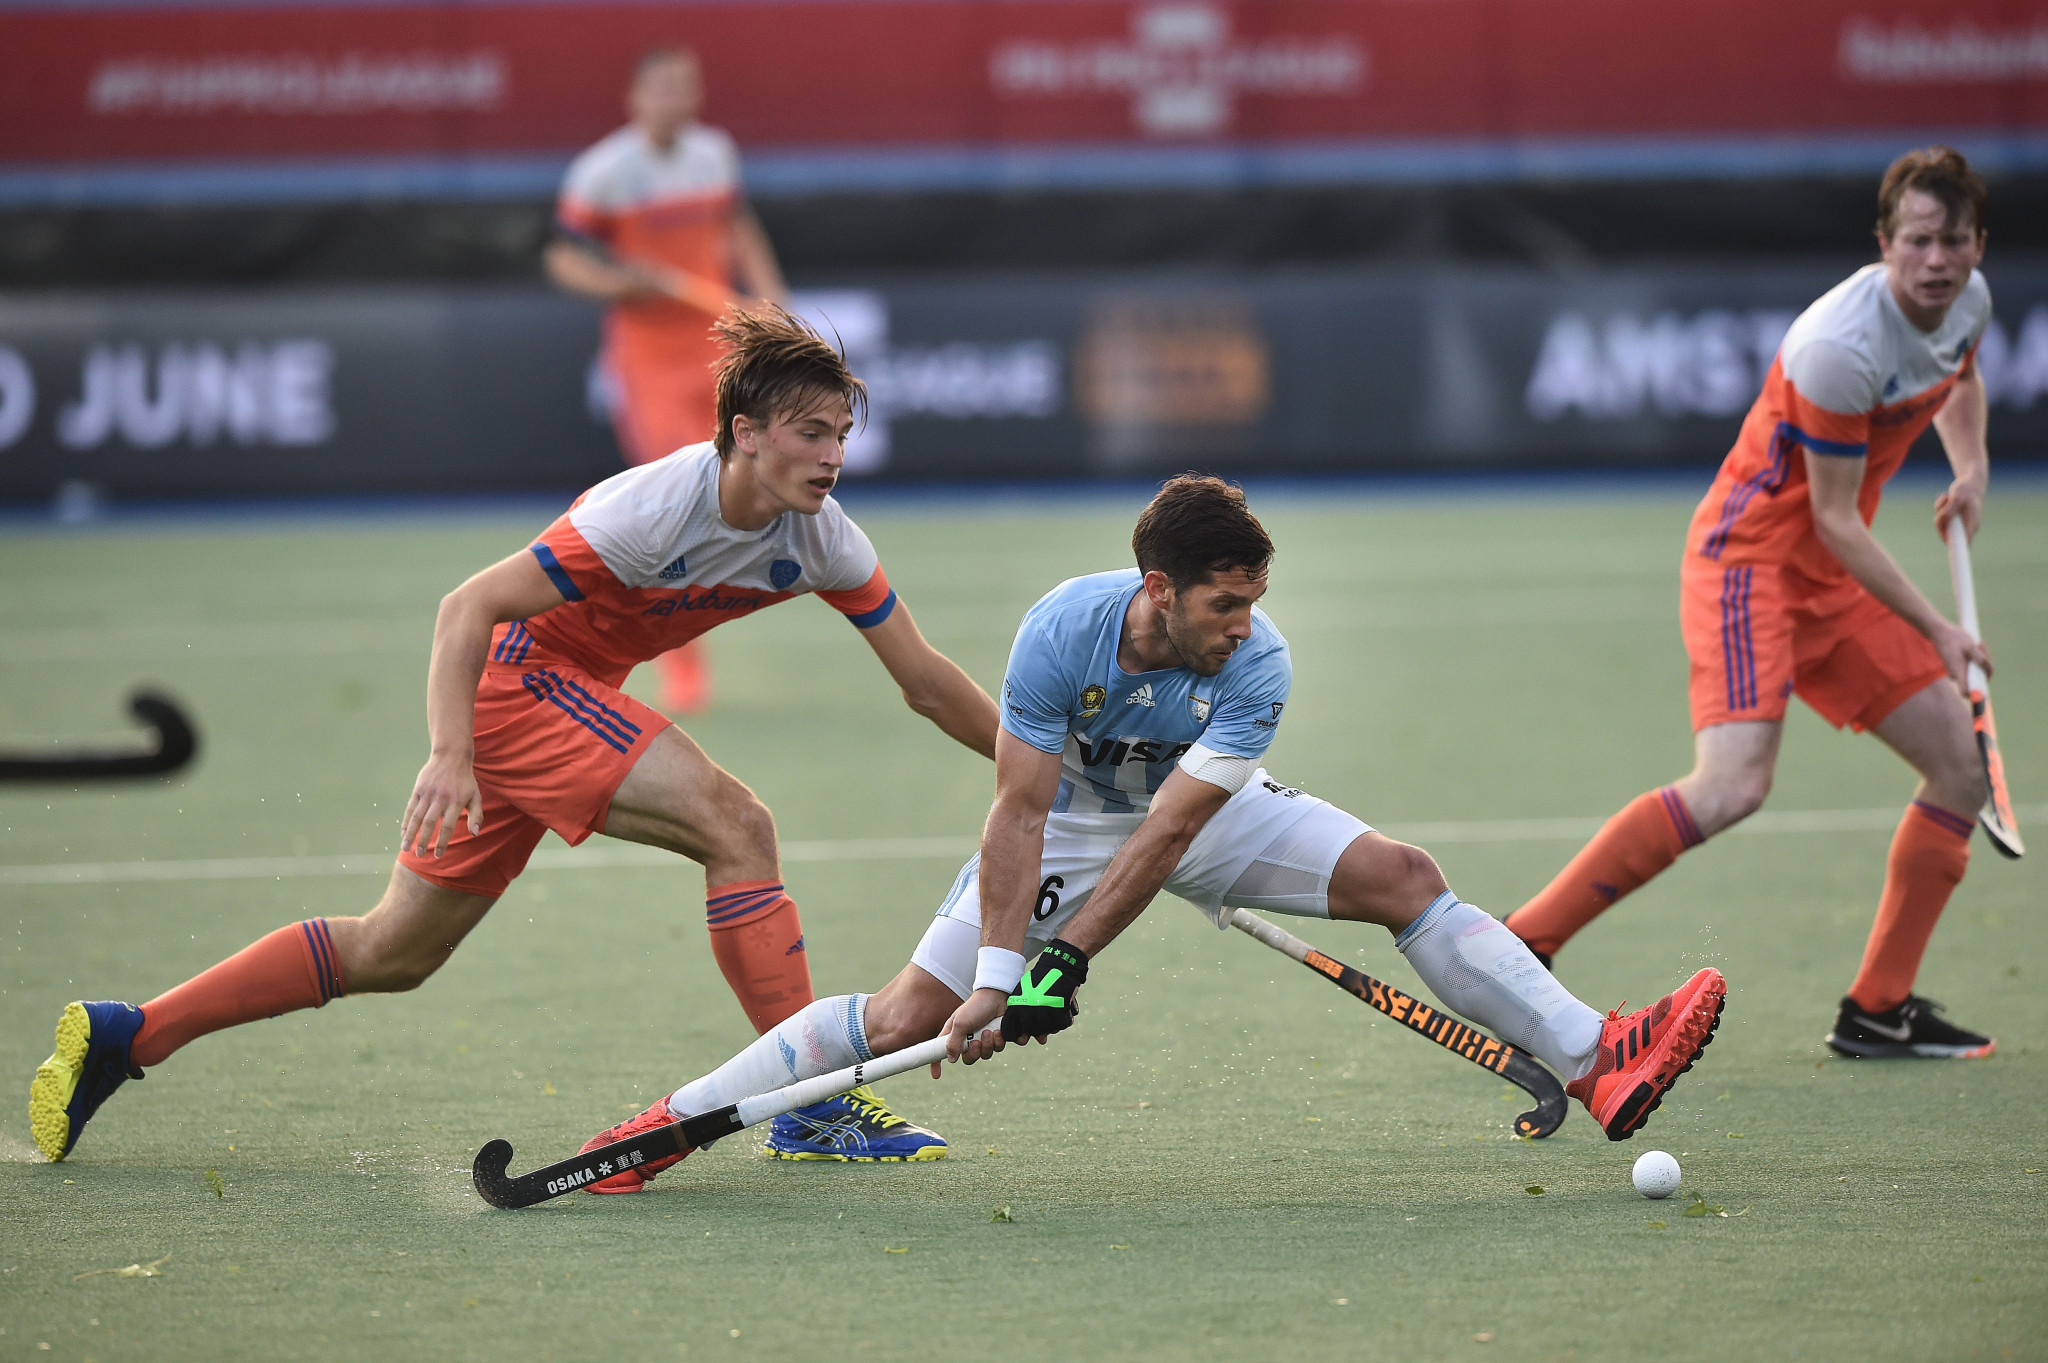 The Netherlands qualified for the Grand Final despite losing a shoot-out to Argentina ©Getty Images